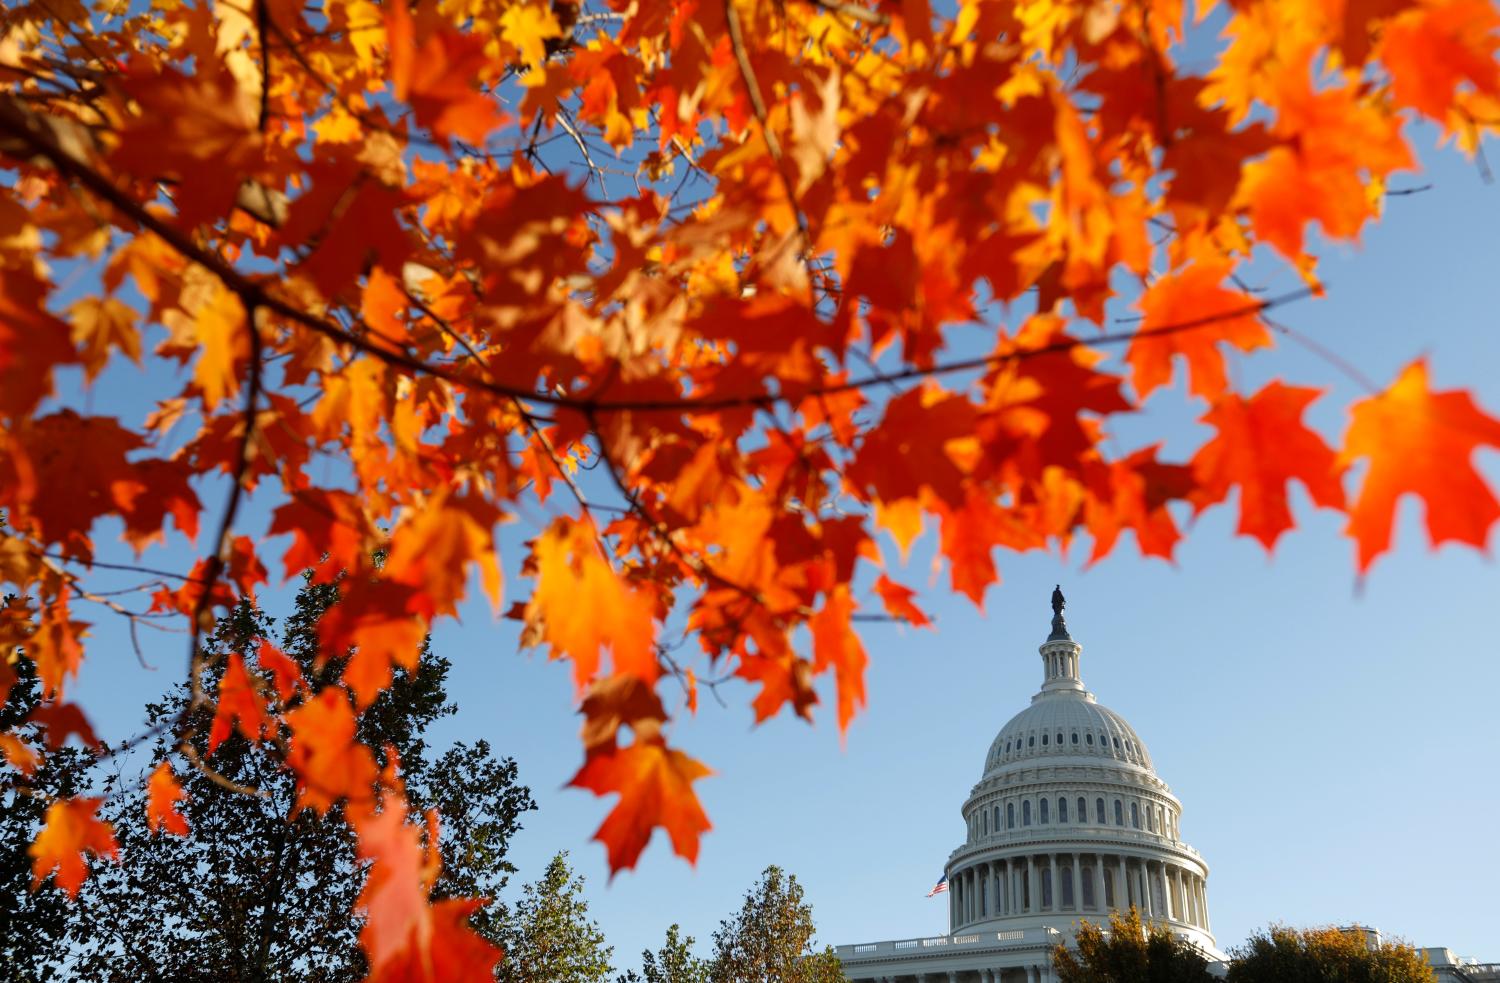 A day after the mid-term election, the dome of the U.S. Capitol is seen through autumn leaves in Washington, U.S., November 7, 2018. REUTERS/Kevin Lamarque - RC1622E7E000